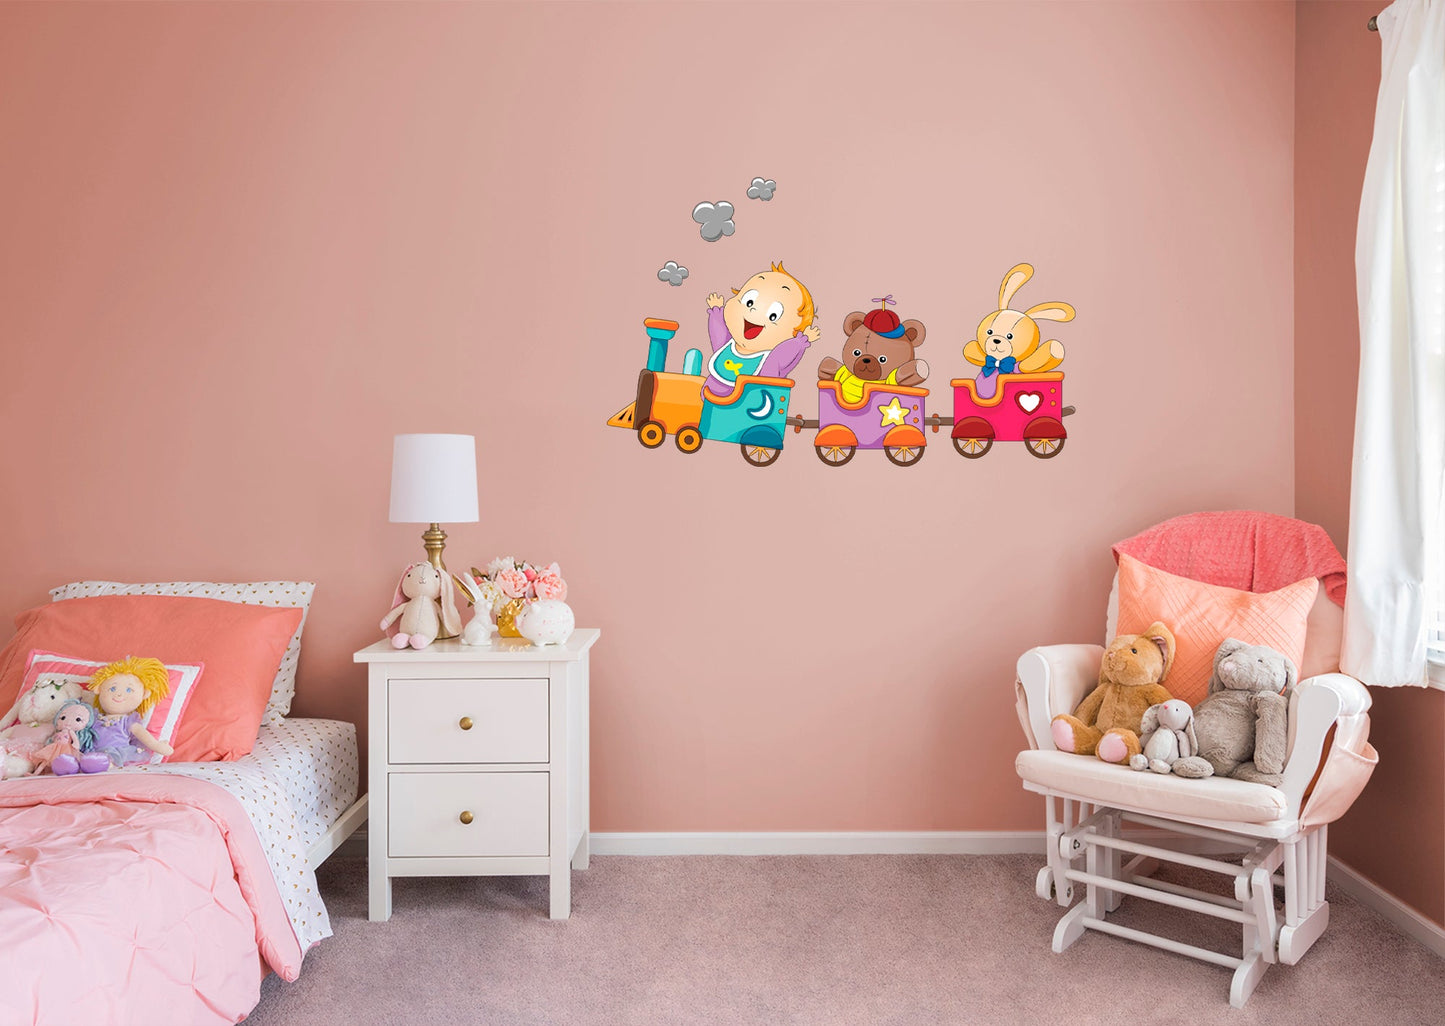 Nursery:  Happy Kid Icon        -   Removable Wall   Adhesive Decal